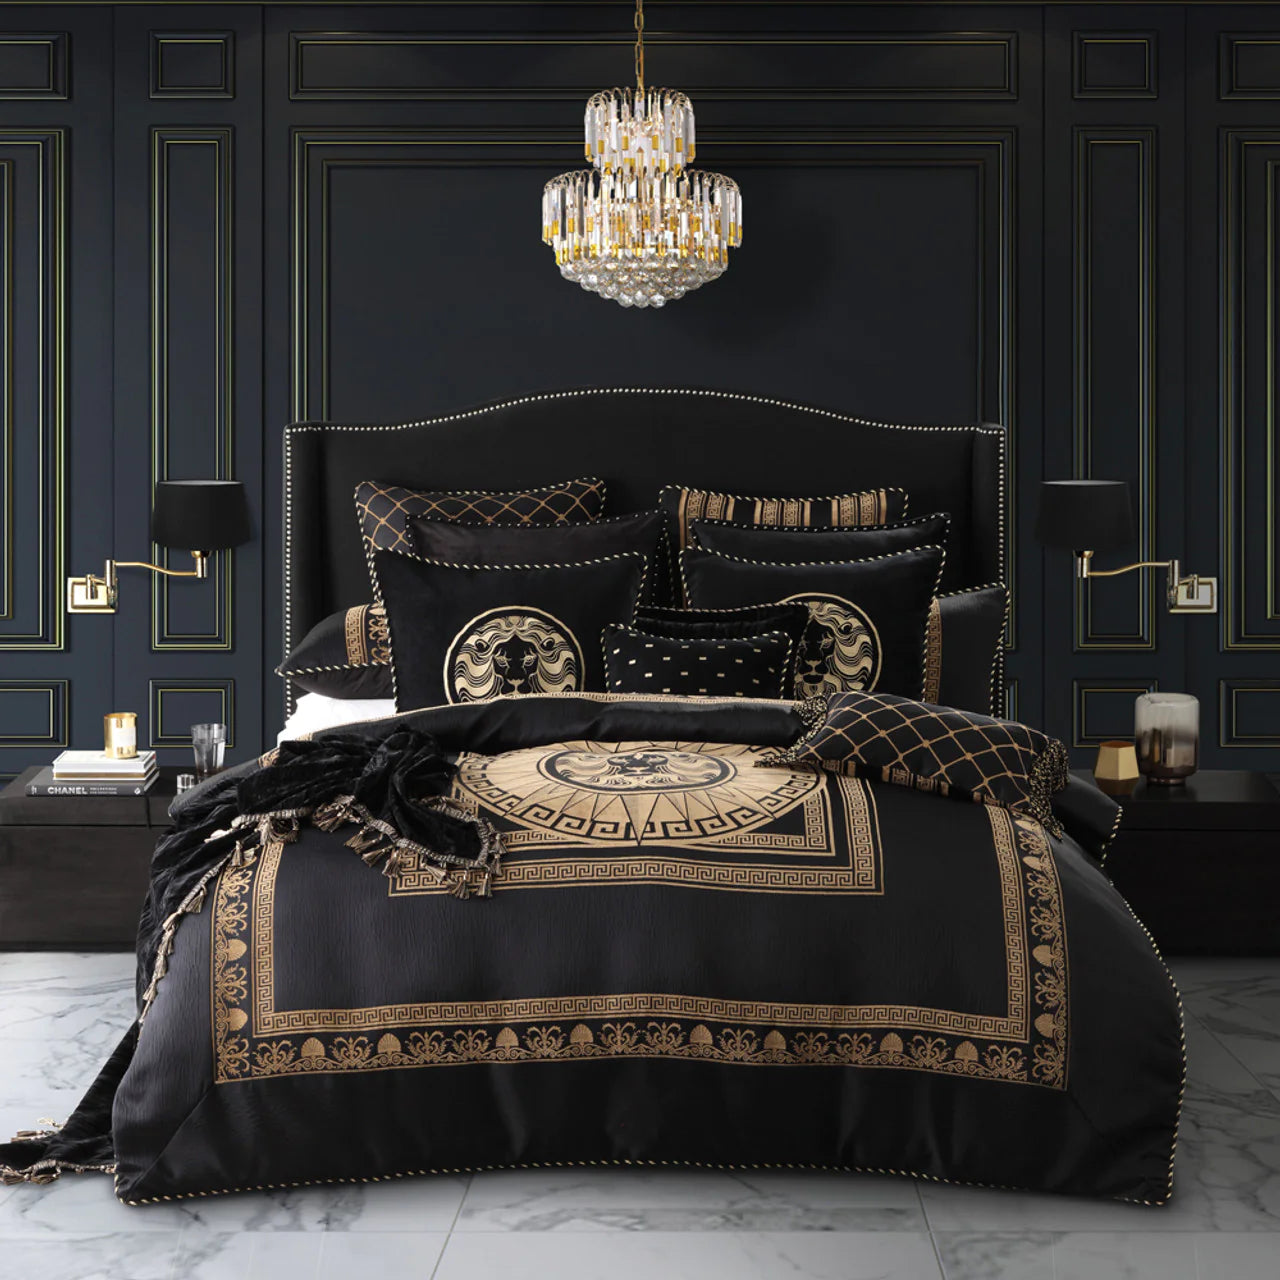 Davinci is a sumptuous collection of classic master bedroom stories, complete with co-ordinating accessories. Traditional design elements are fashioned into opulent statements which are inherently lavish, artistic and dramatic. Shop online today at Linen Emporium.